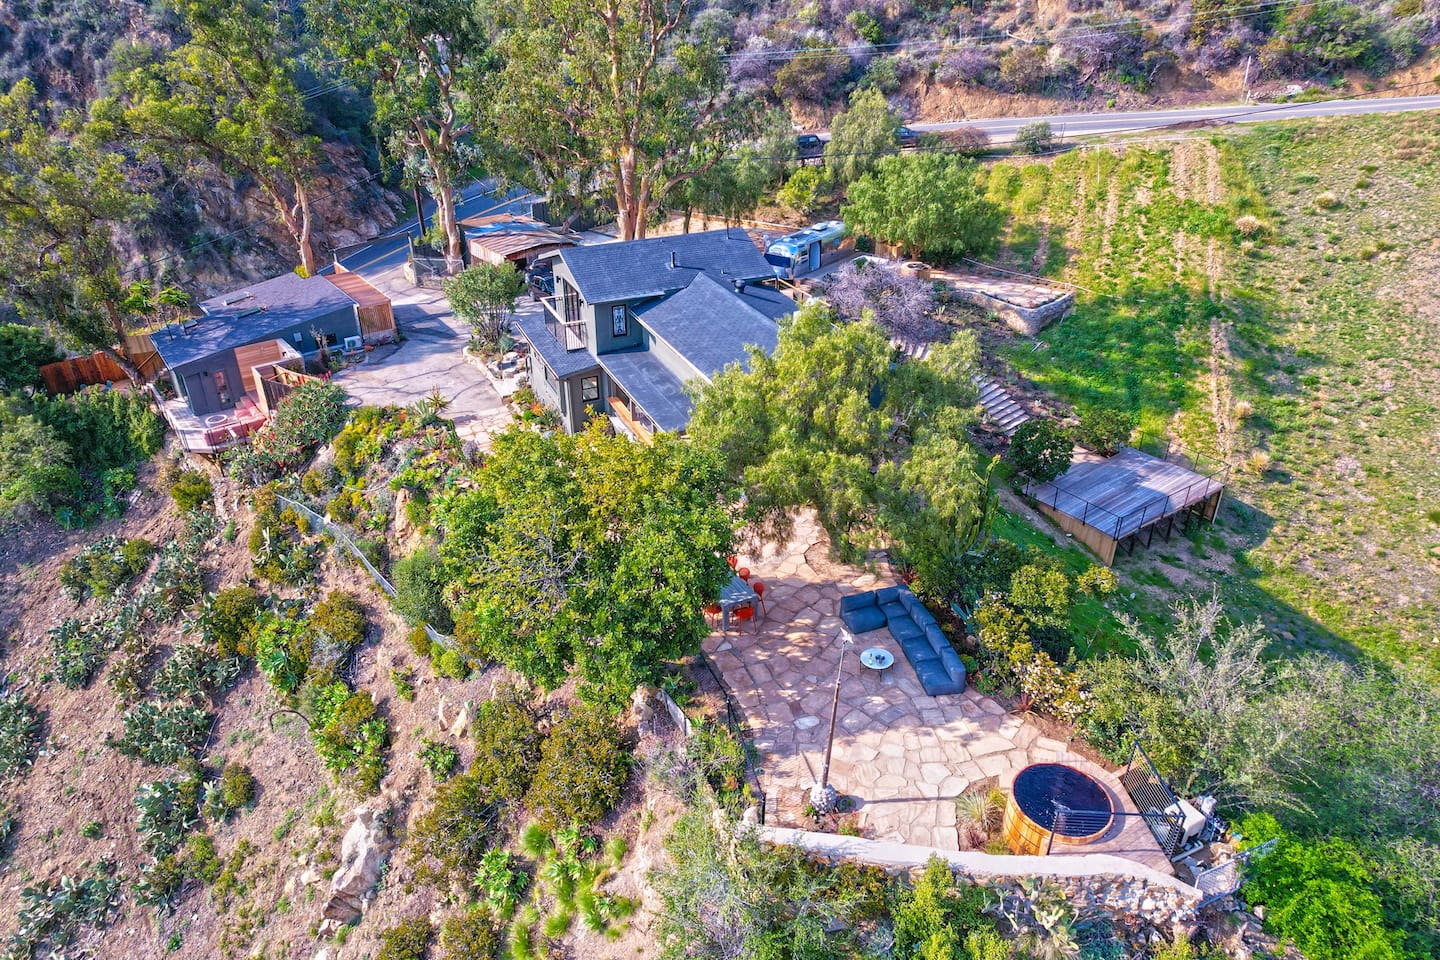 Luxe ocean home in Malibu, one of the best Airbnbs in California